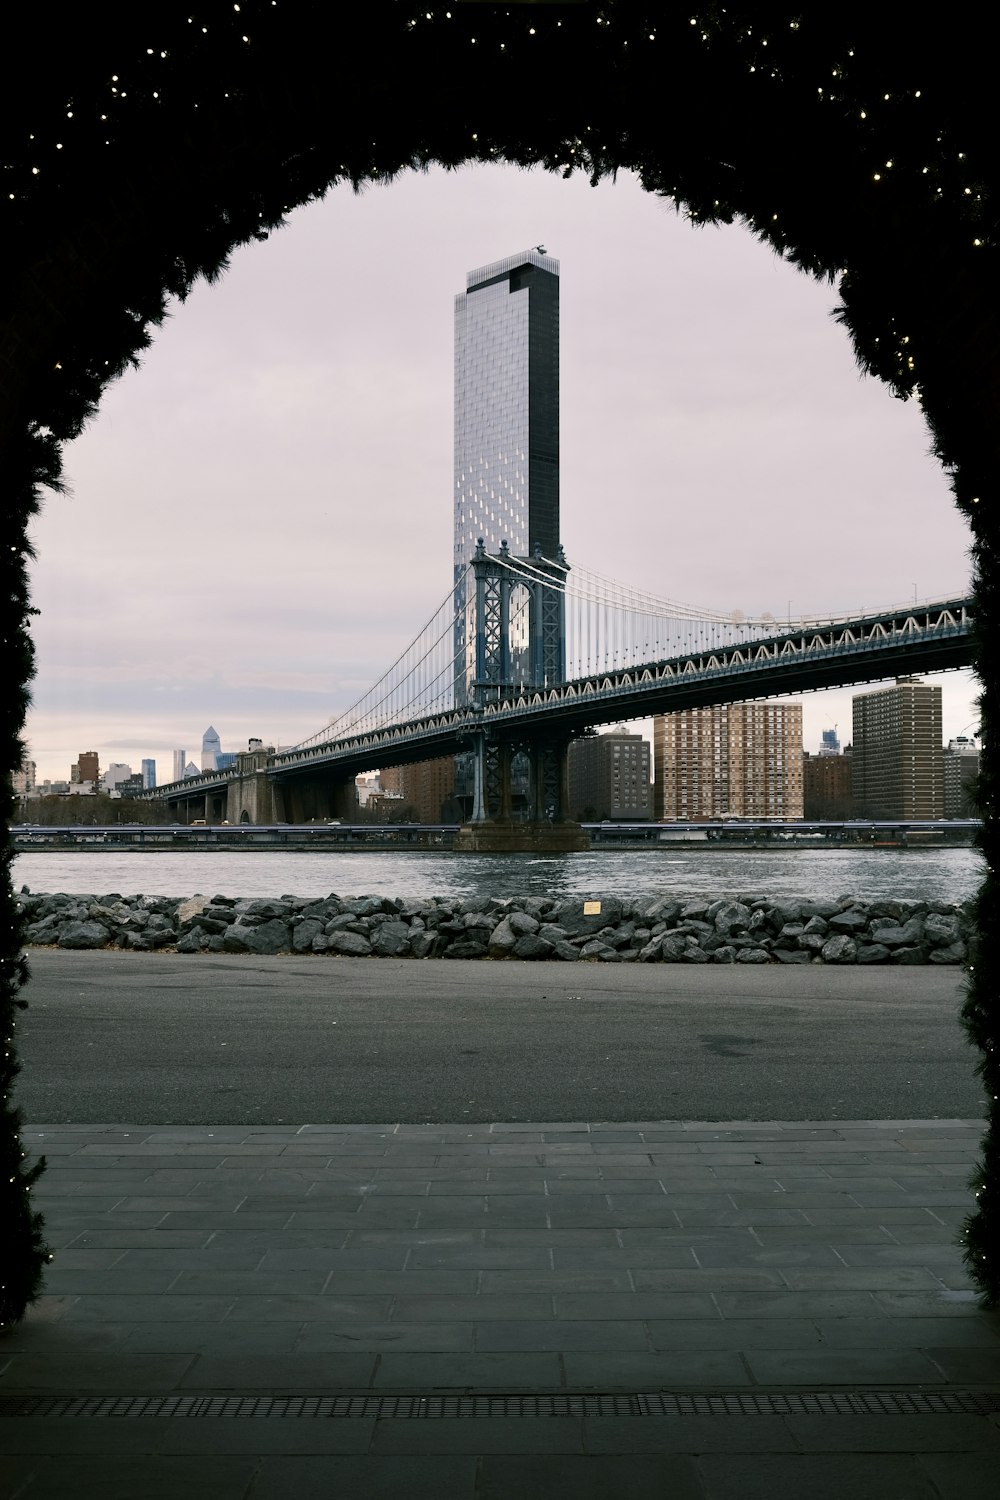 a view of a bridge from across the street